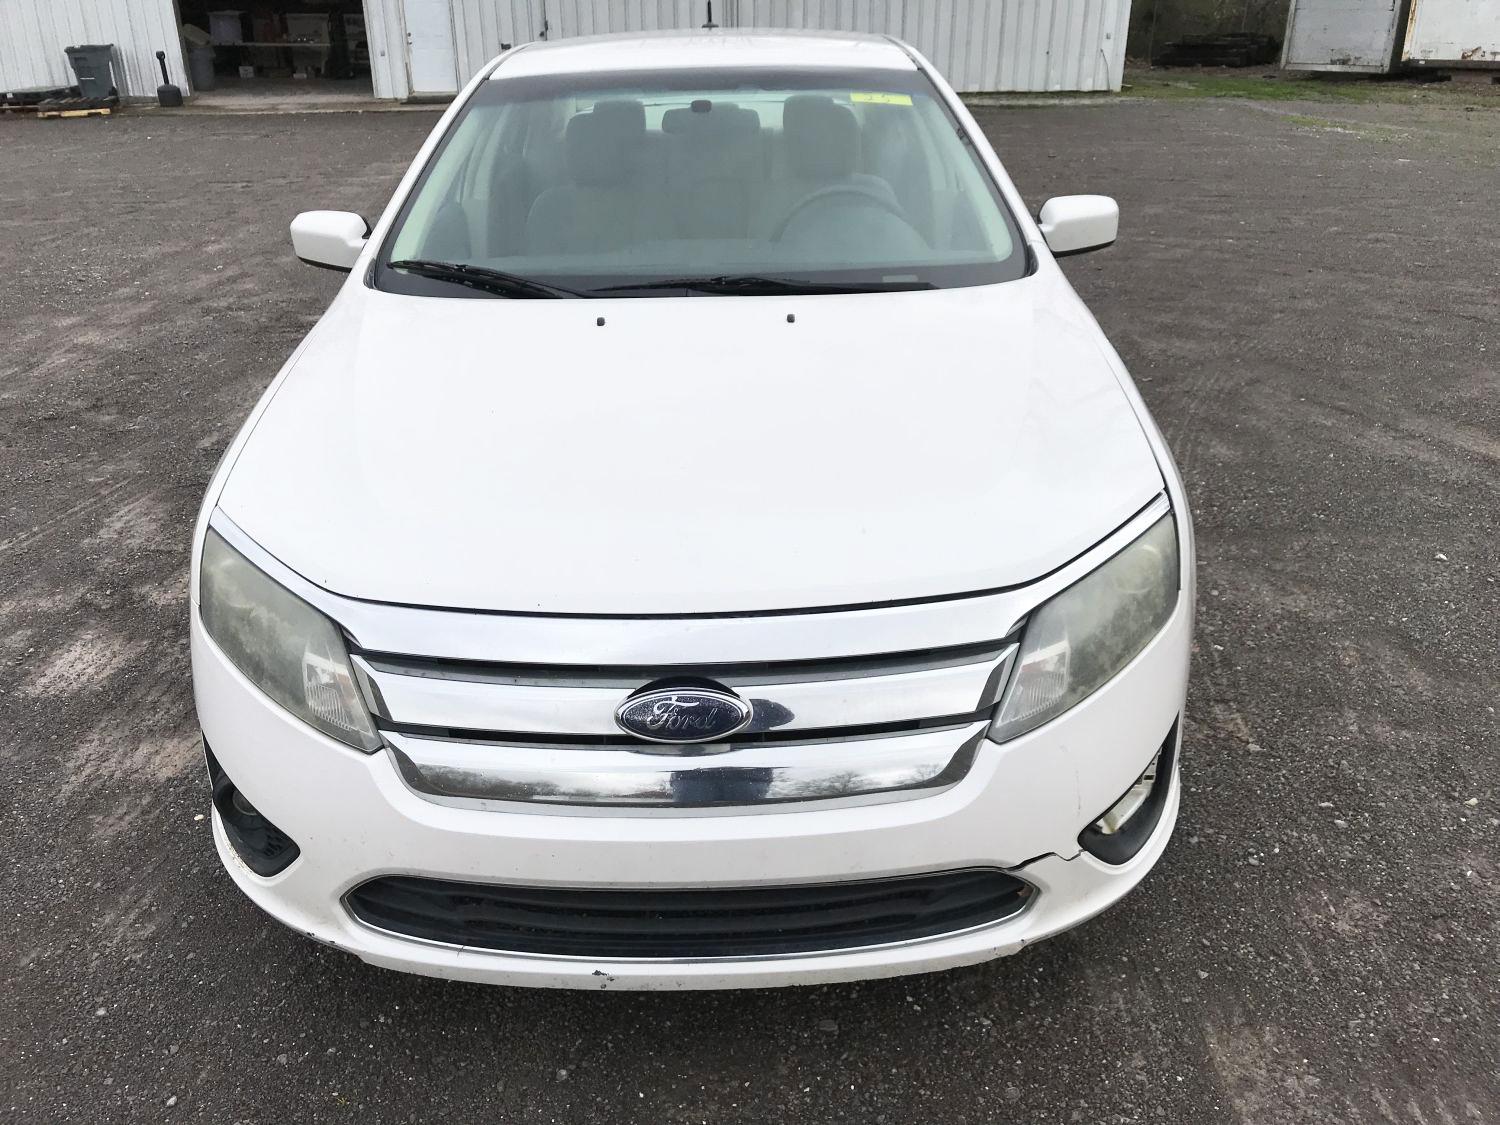 2010 Ford Fusion SE 4-door pearl white sedan, 158608mi, 2.5 liter 4 cylinder gas engine, automatic t